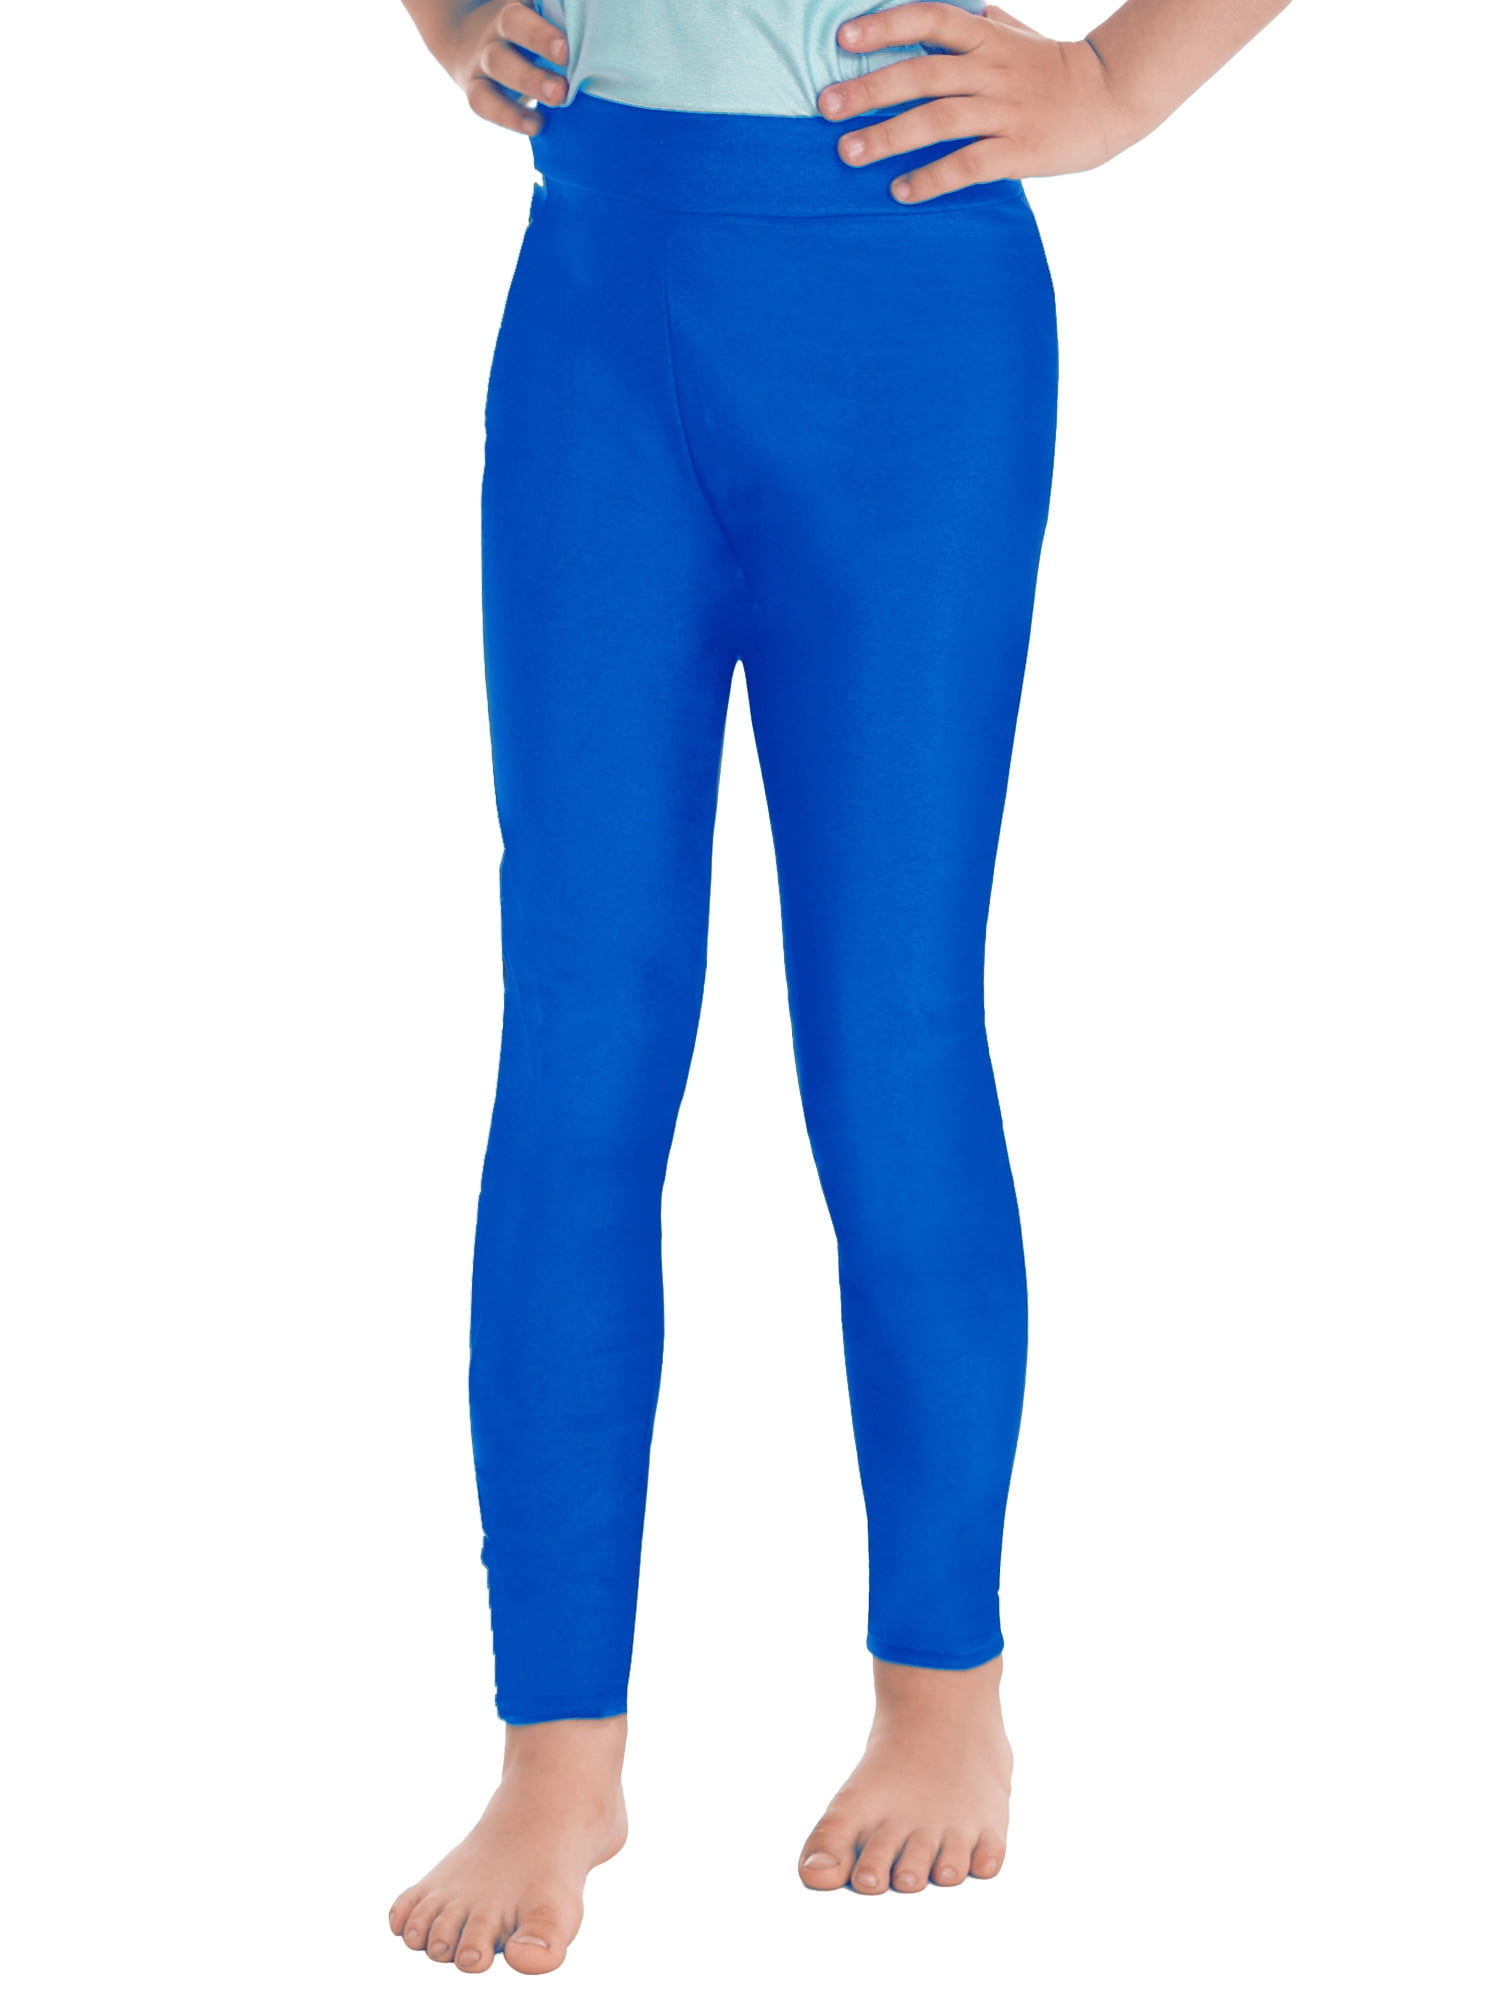 Blue Yoga Pants For Sale  International Society of Precision